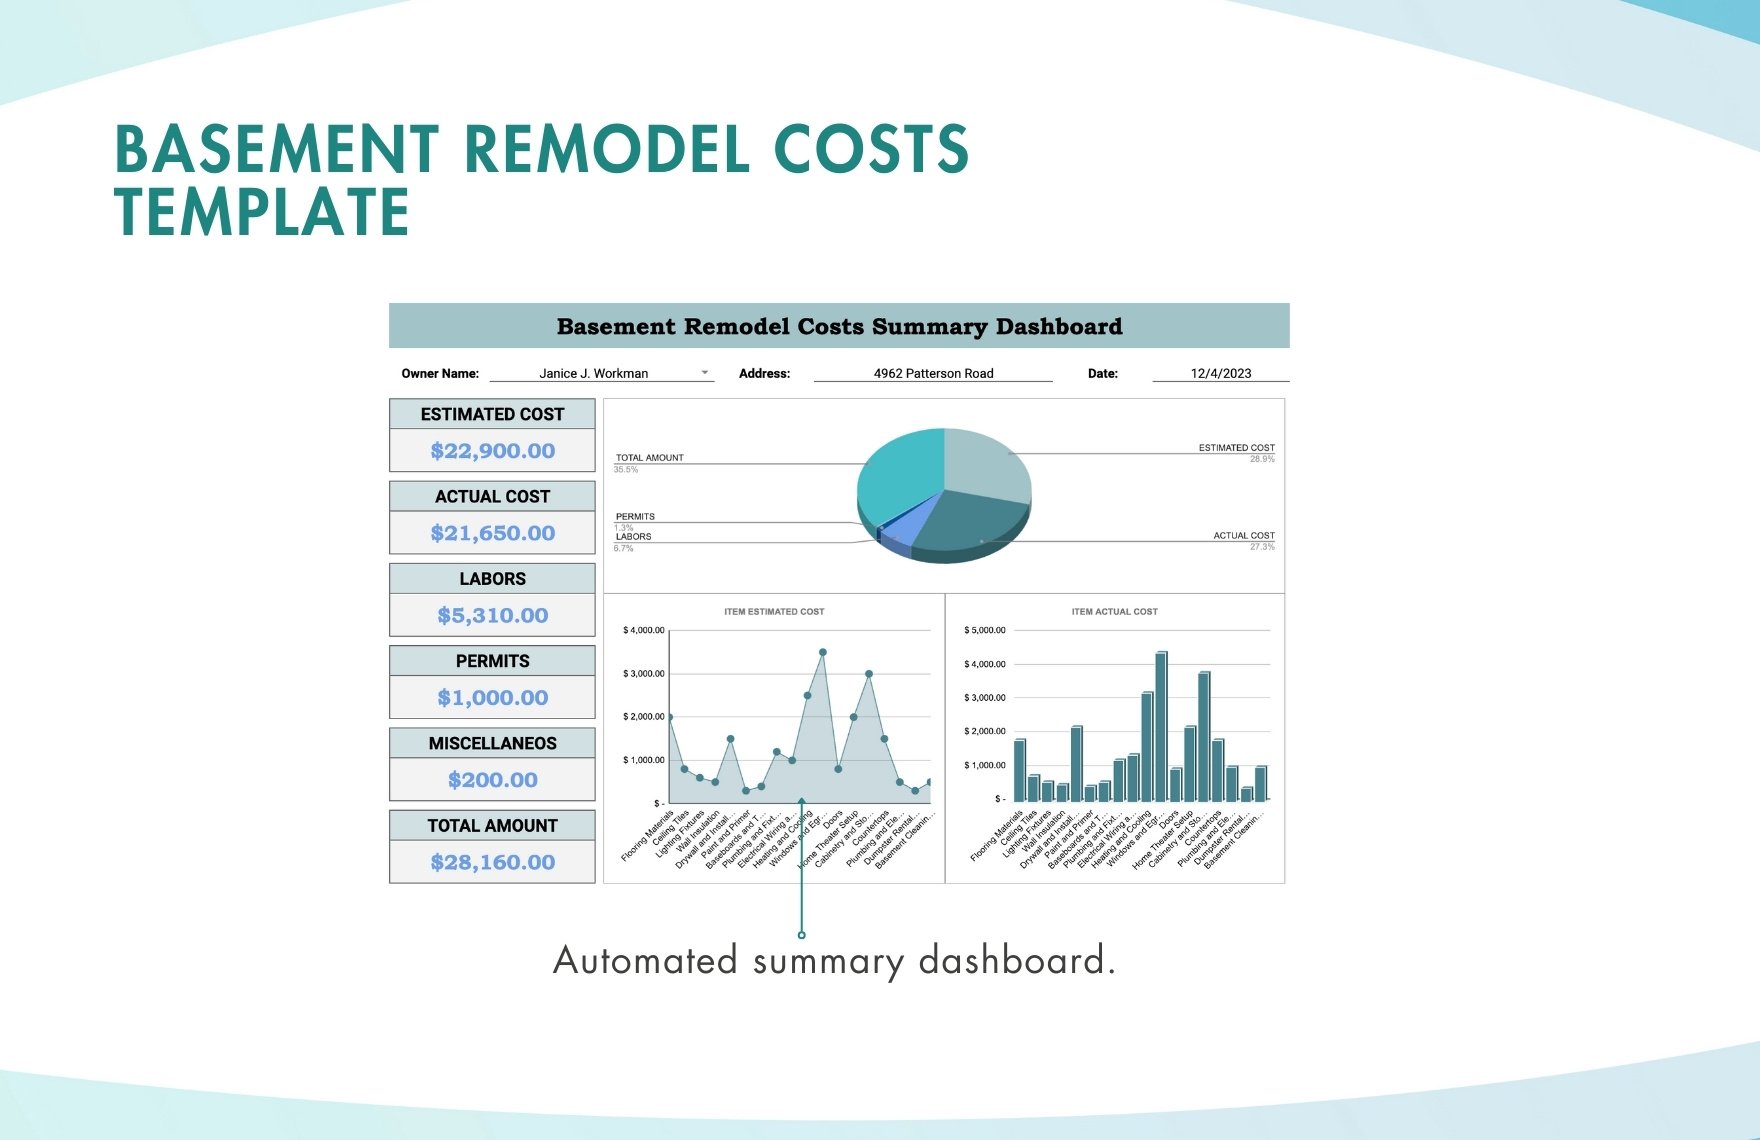 Basement Remodel Costs Template